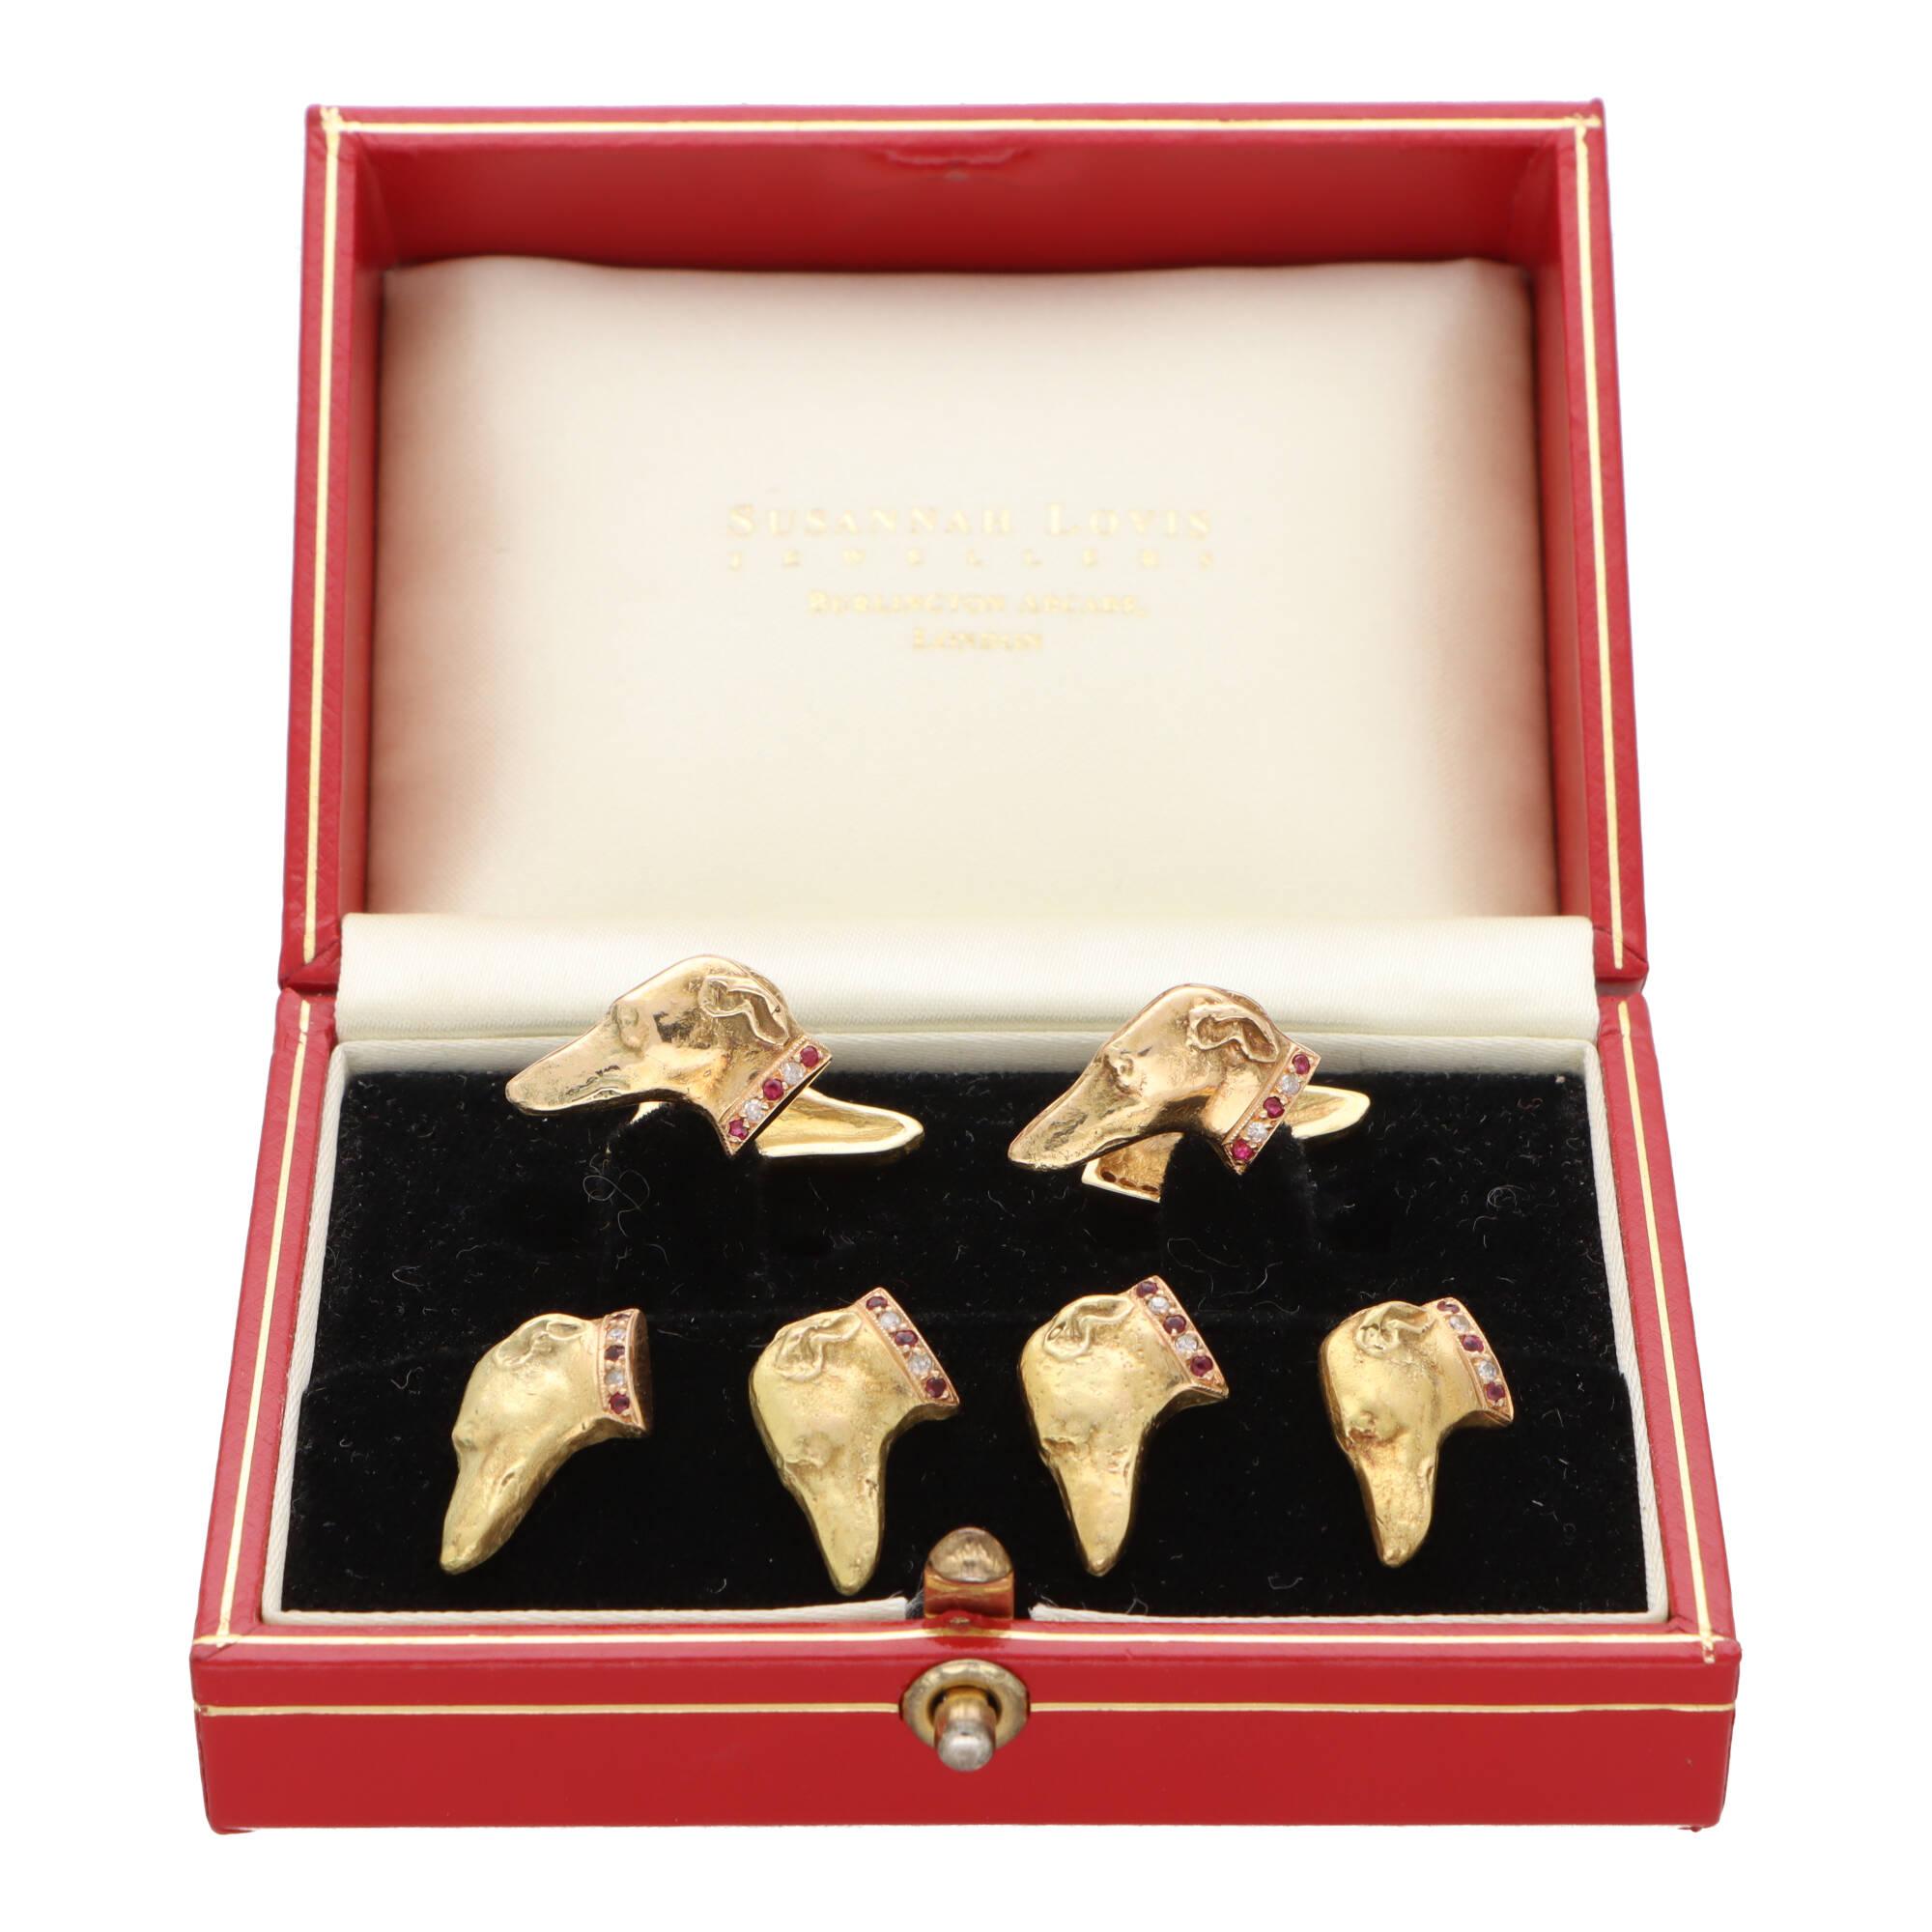 An incredibly unique ruby and diamond Greyhound cufflink and shirt stud dress set, made in 18k yellow gold. 

This beautiful set is firstly composed of a double sided pair of Greyhound cufflinks. The Greyhound faces have been beautifully handcrafted